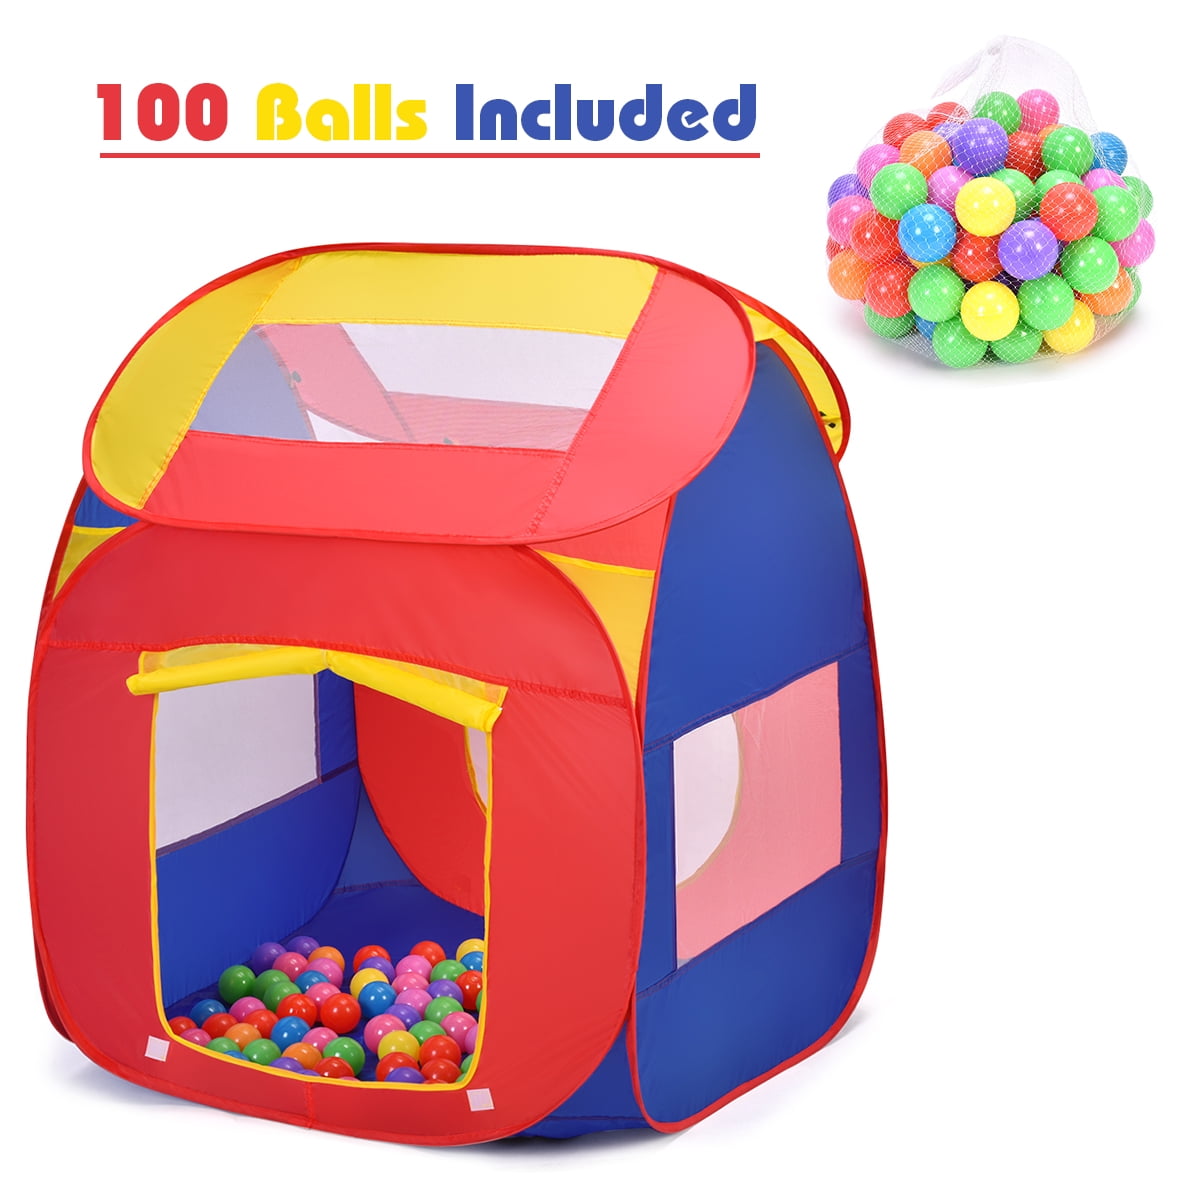 Portable Kids Child Ball Pit Pool Play Tent for Baby Indoor Outdoor Game Toy HOT 